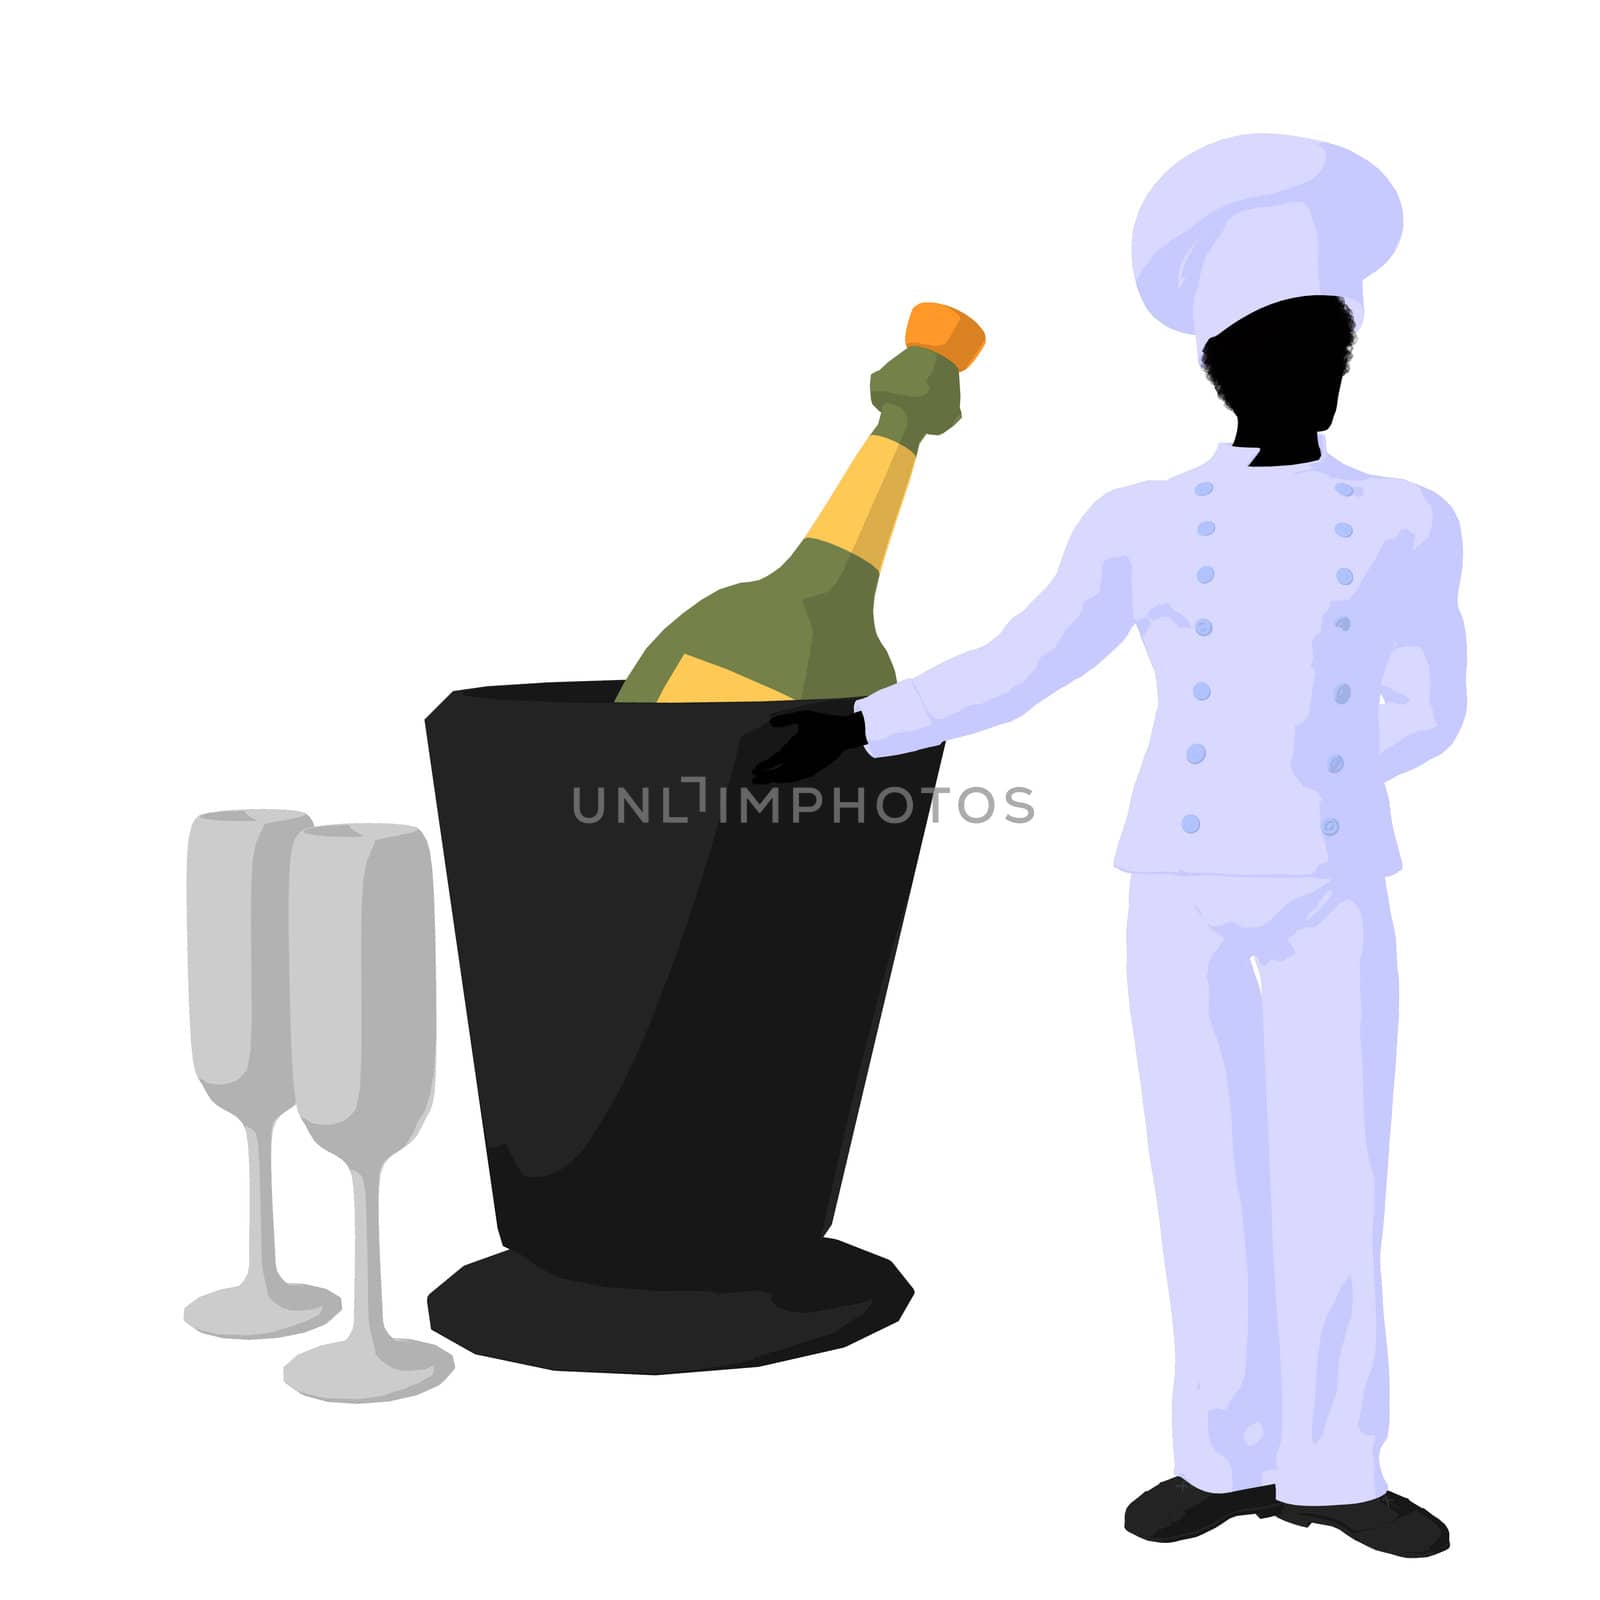 African american chef and champagne silhouette on a white background